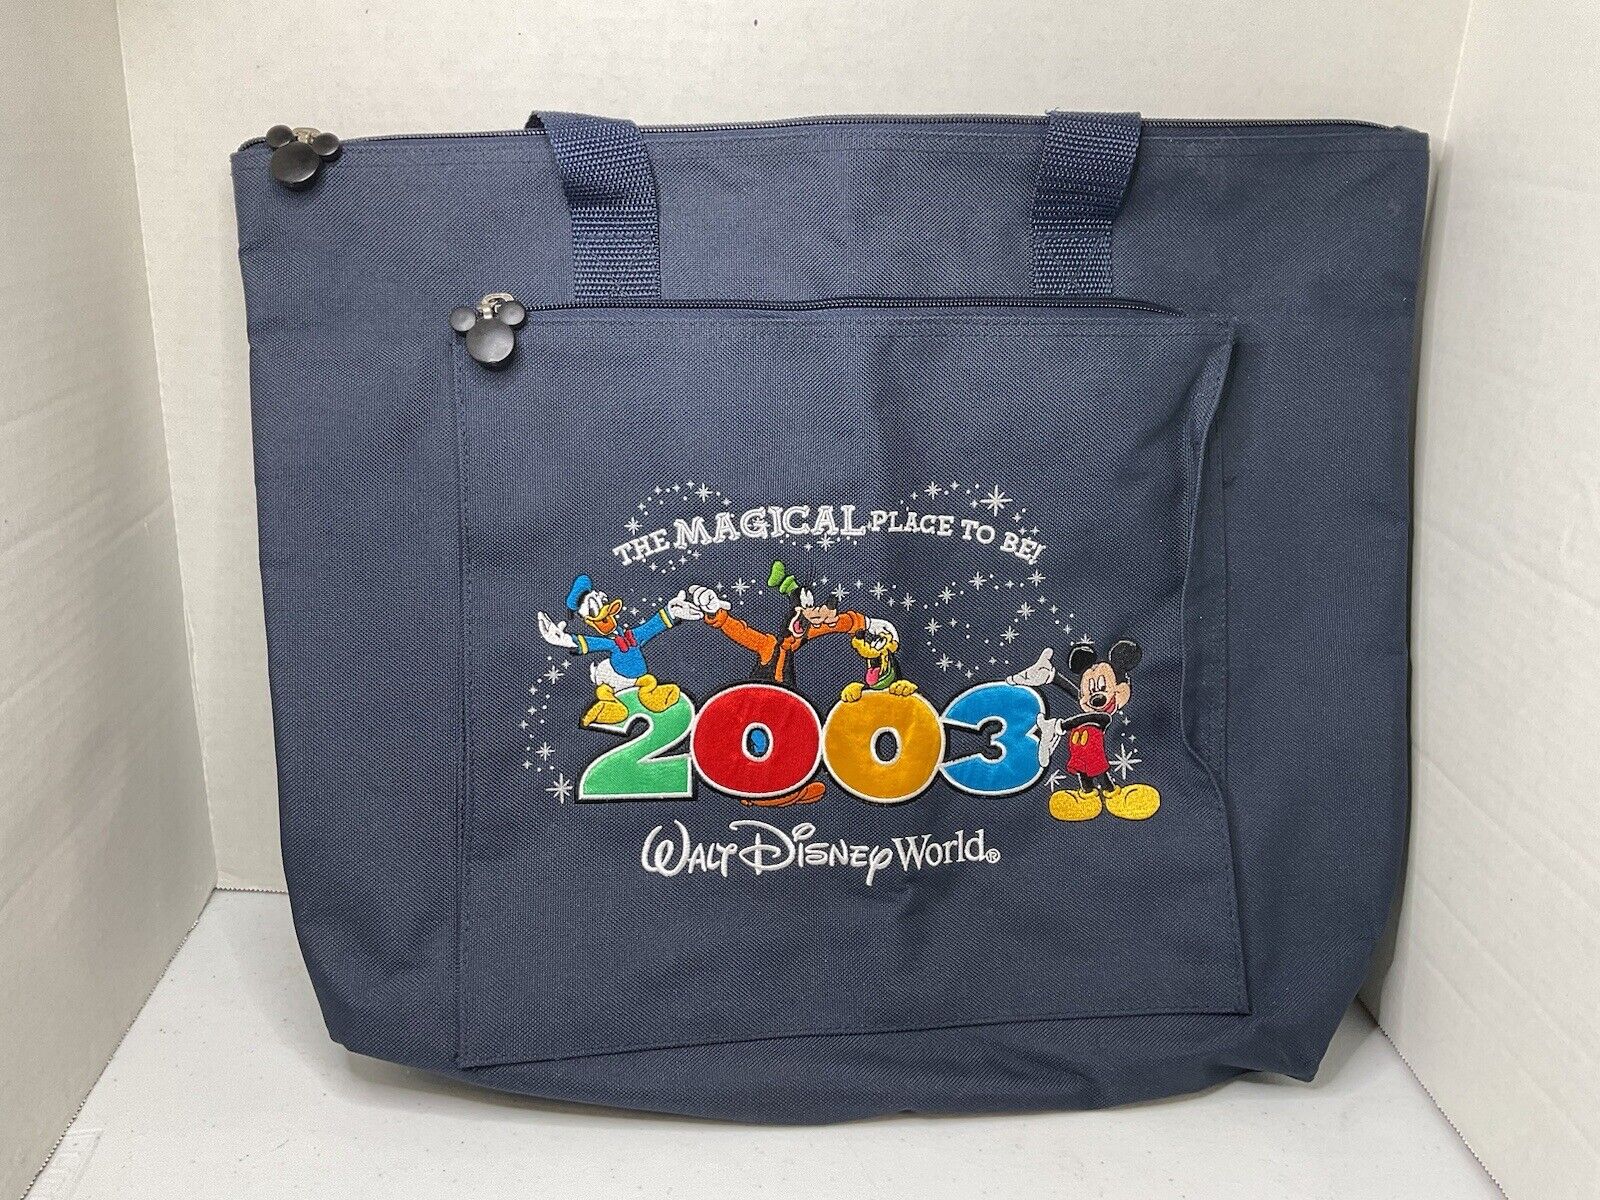 Vintage Walt Disney World 2003 Tote Blue The Magical Place To Be